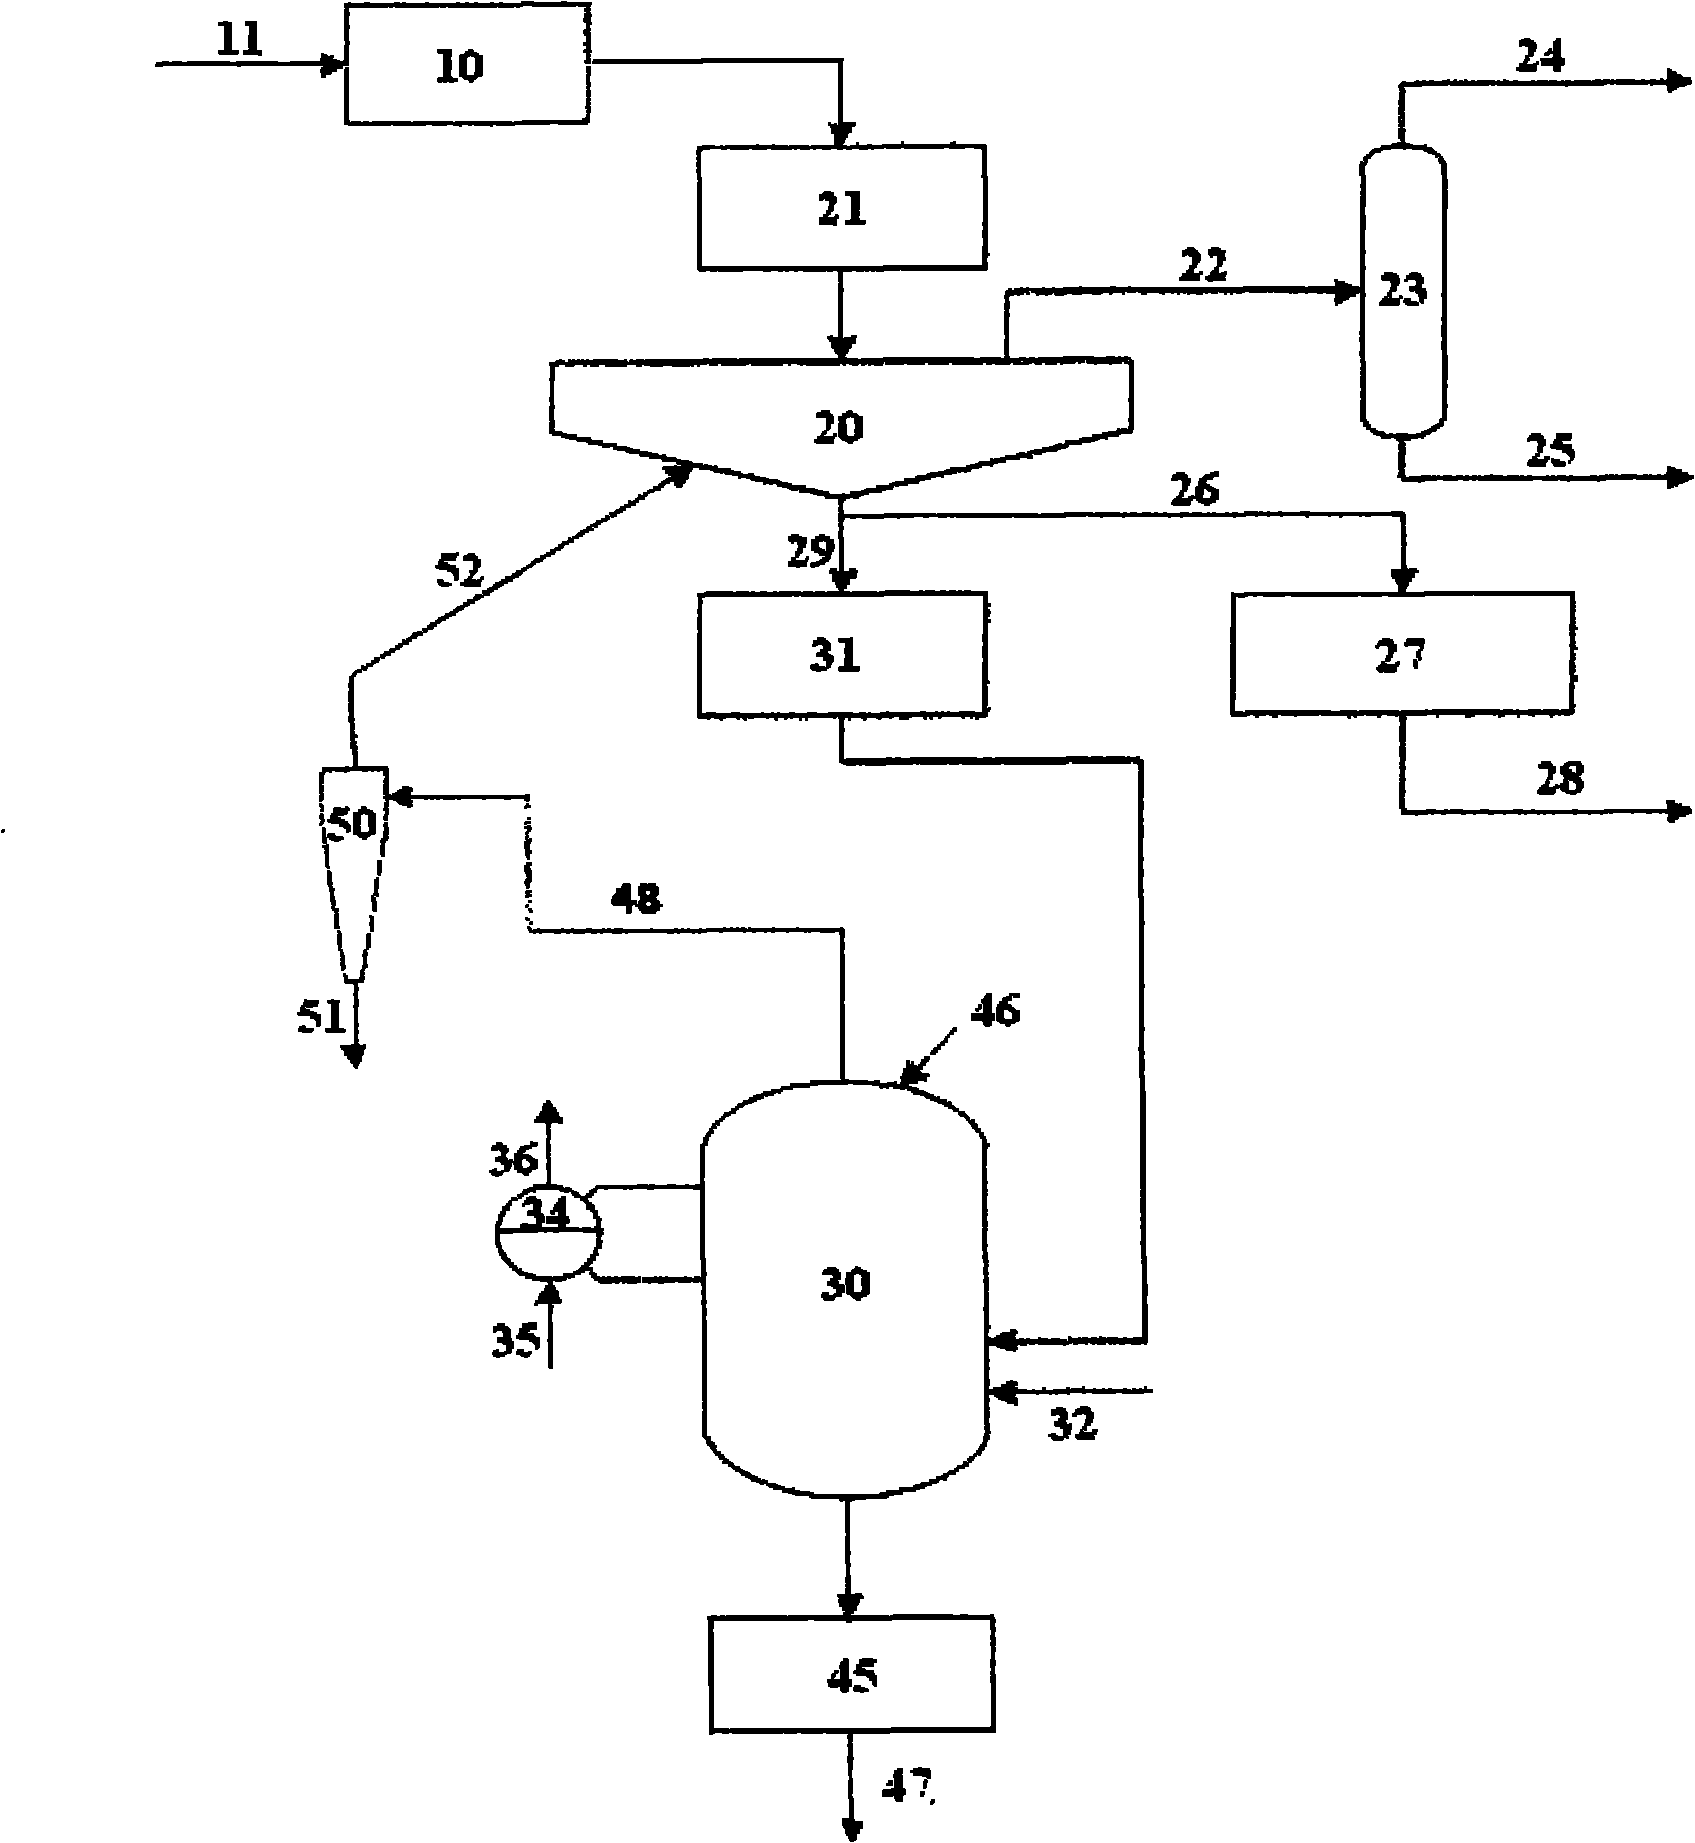 System for preparing solid, liquid and gas products from coal and biomass and method using same